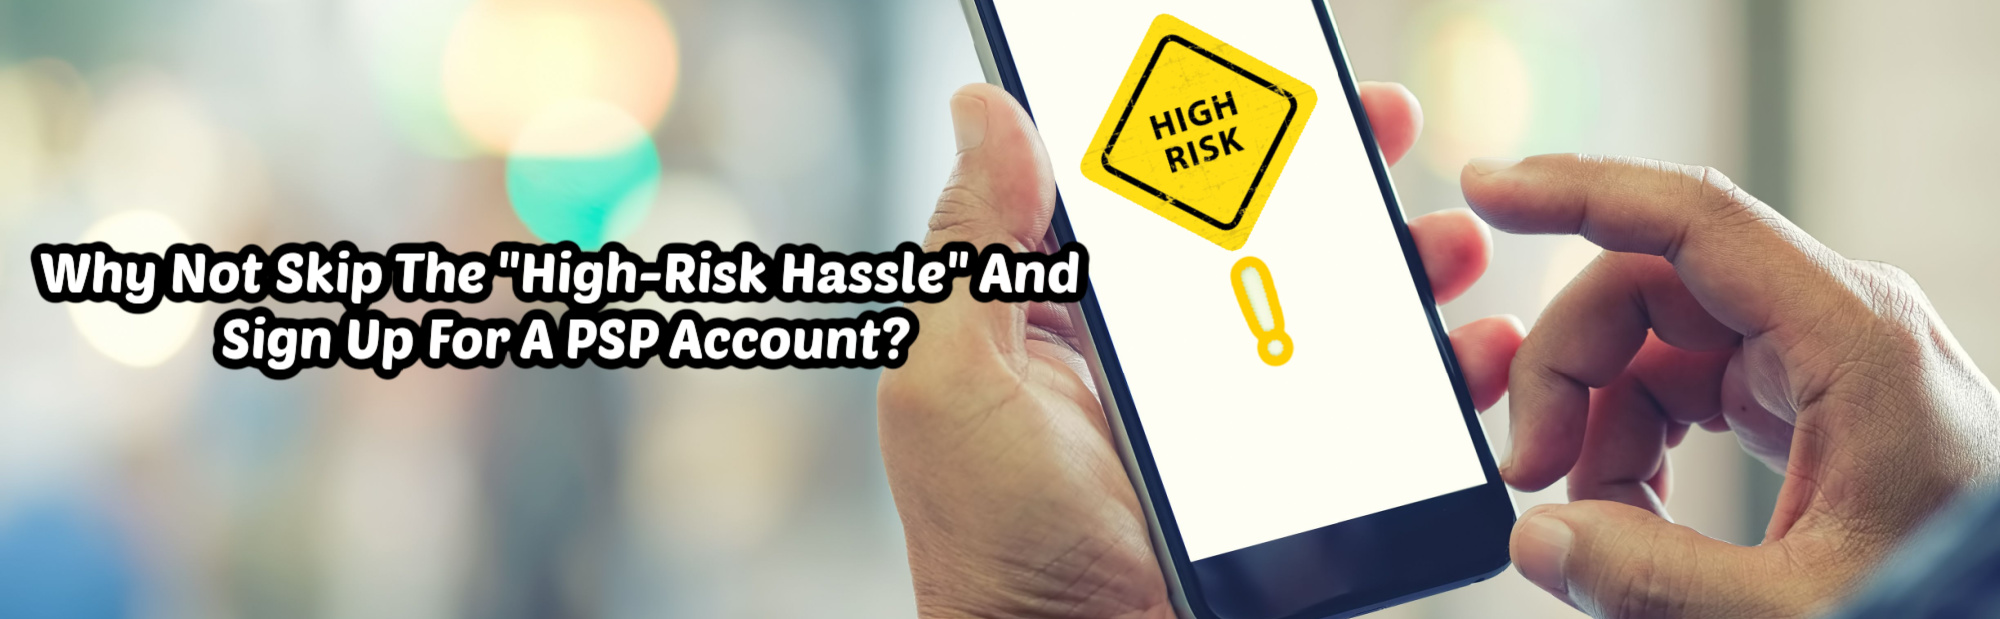 image of why not skip high risk hassle and sign up for psp account